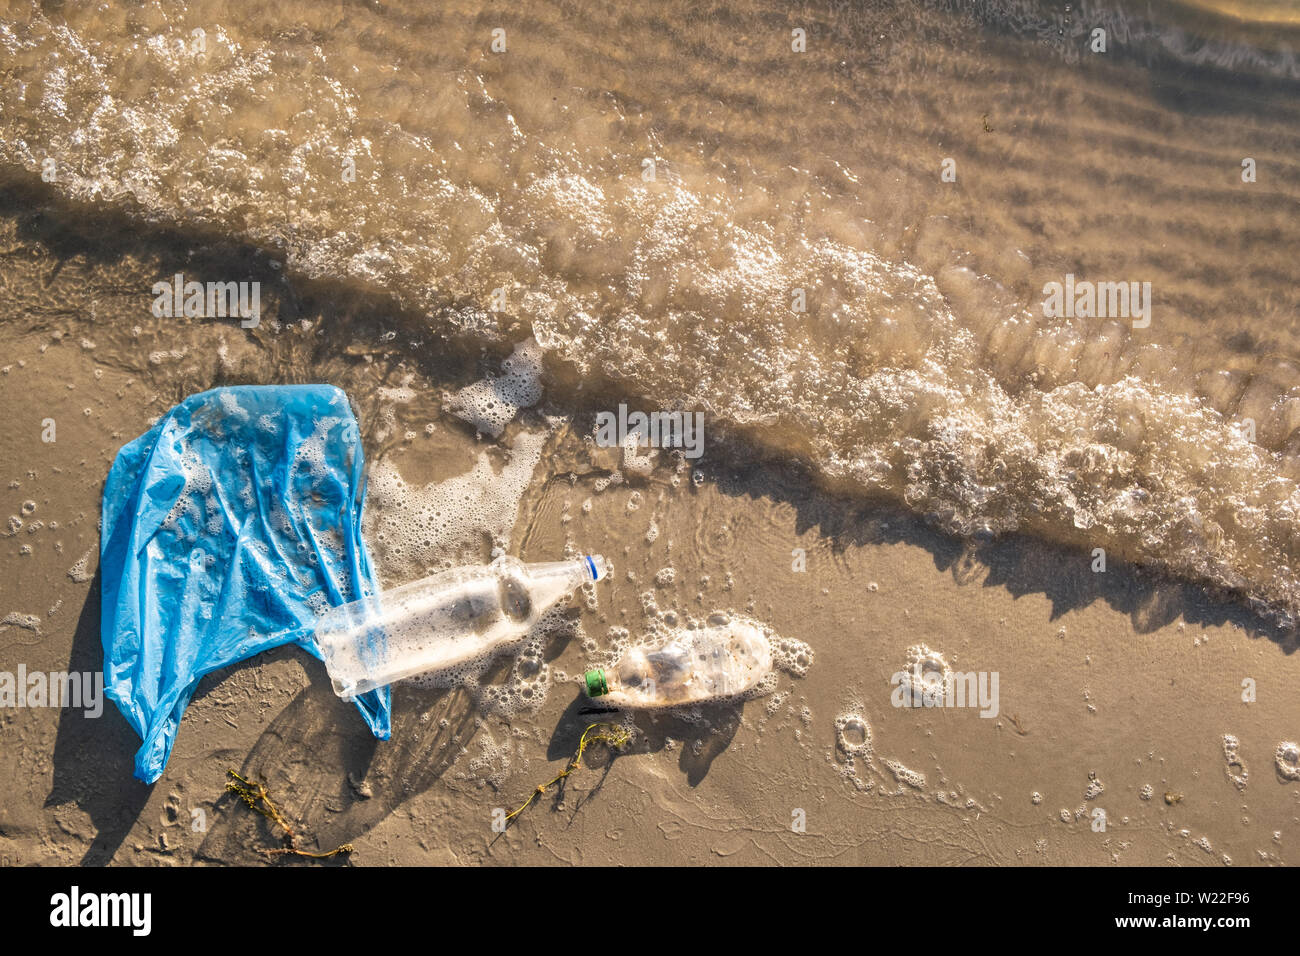 Plastic bag and bottles on the beach, seashore and water pollution concept. Trash (empty food package) thrown away at the seaside, top view with waves Stock Photo